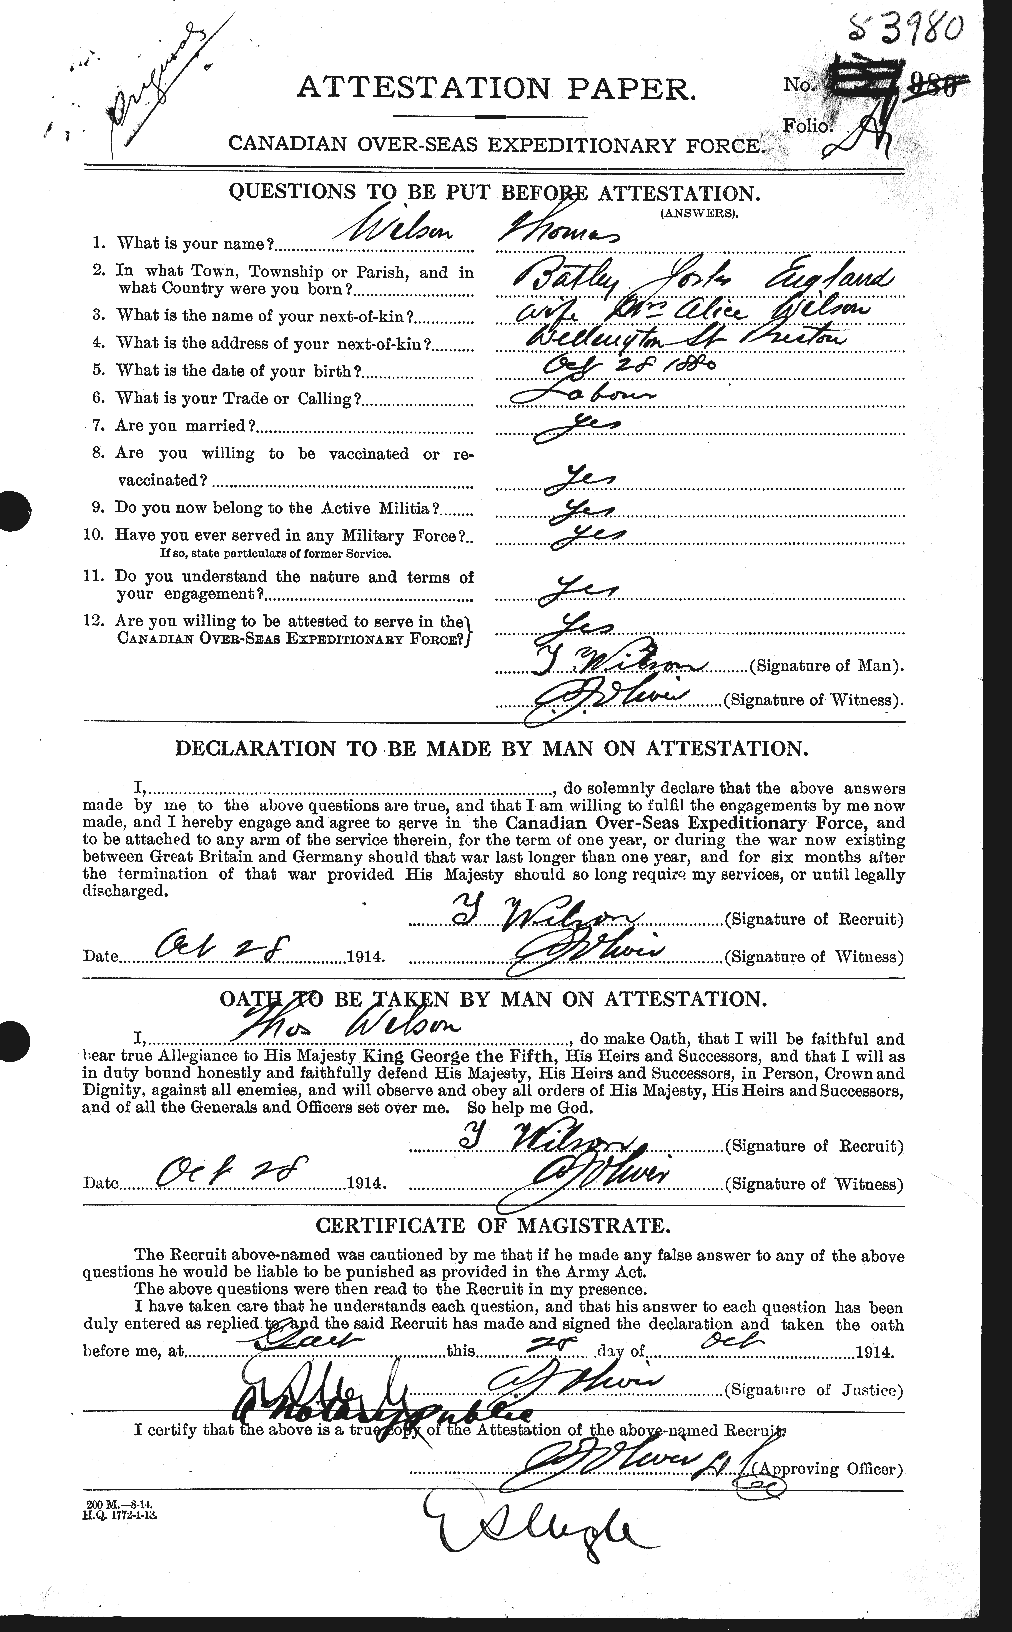 Personnel Records of the First World War - CEF 681174a